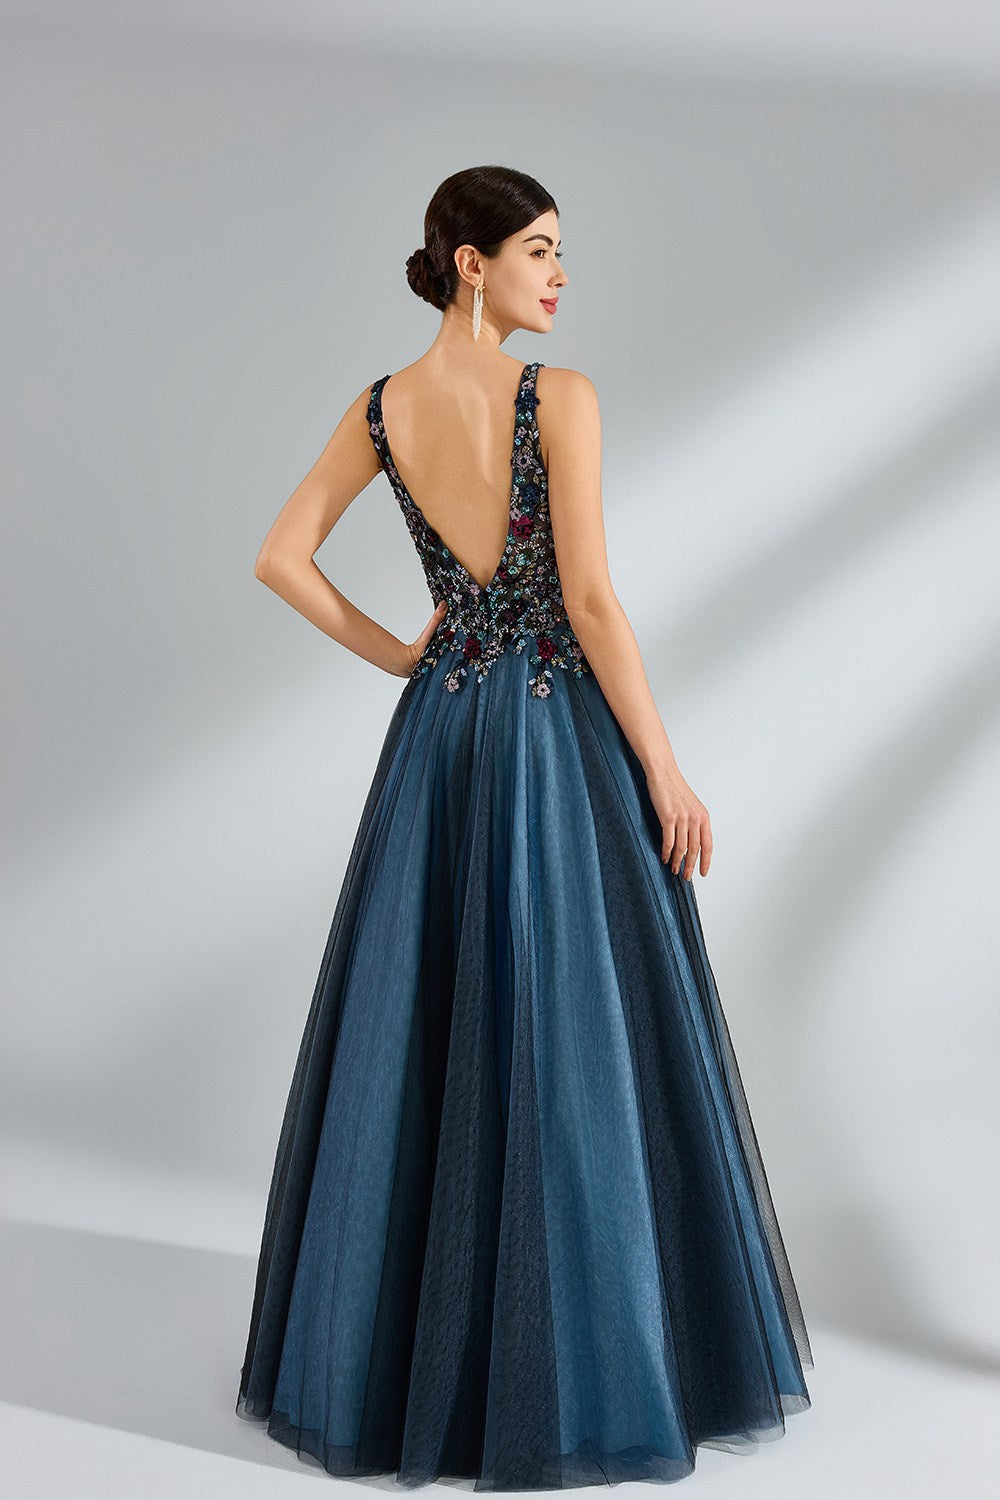 Multicolored Beaded Ball Gown for a Magical Prom Night 3320